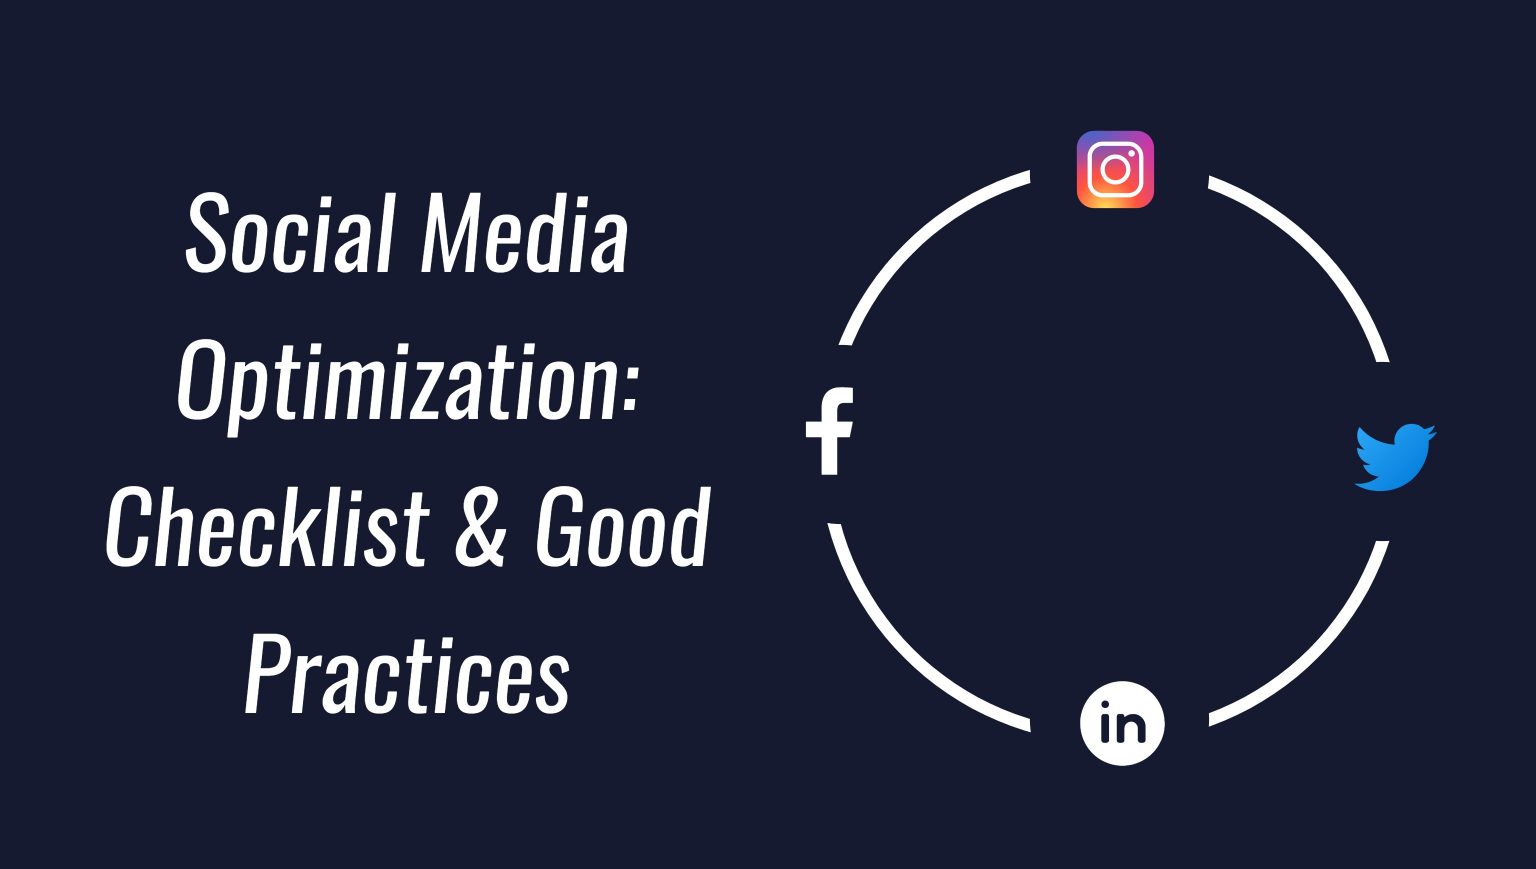 Social Media Optimization: Checklists and Good Practices